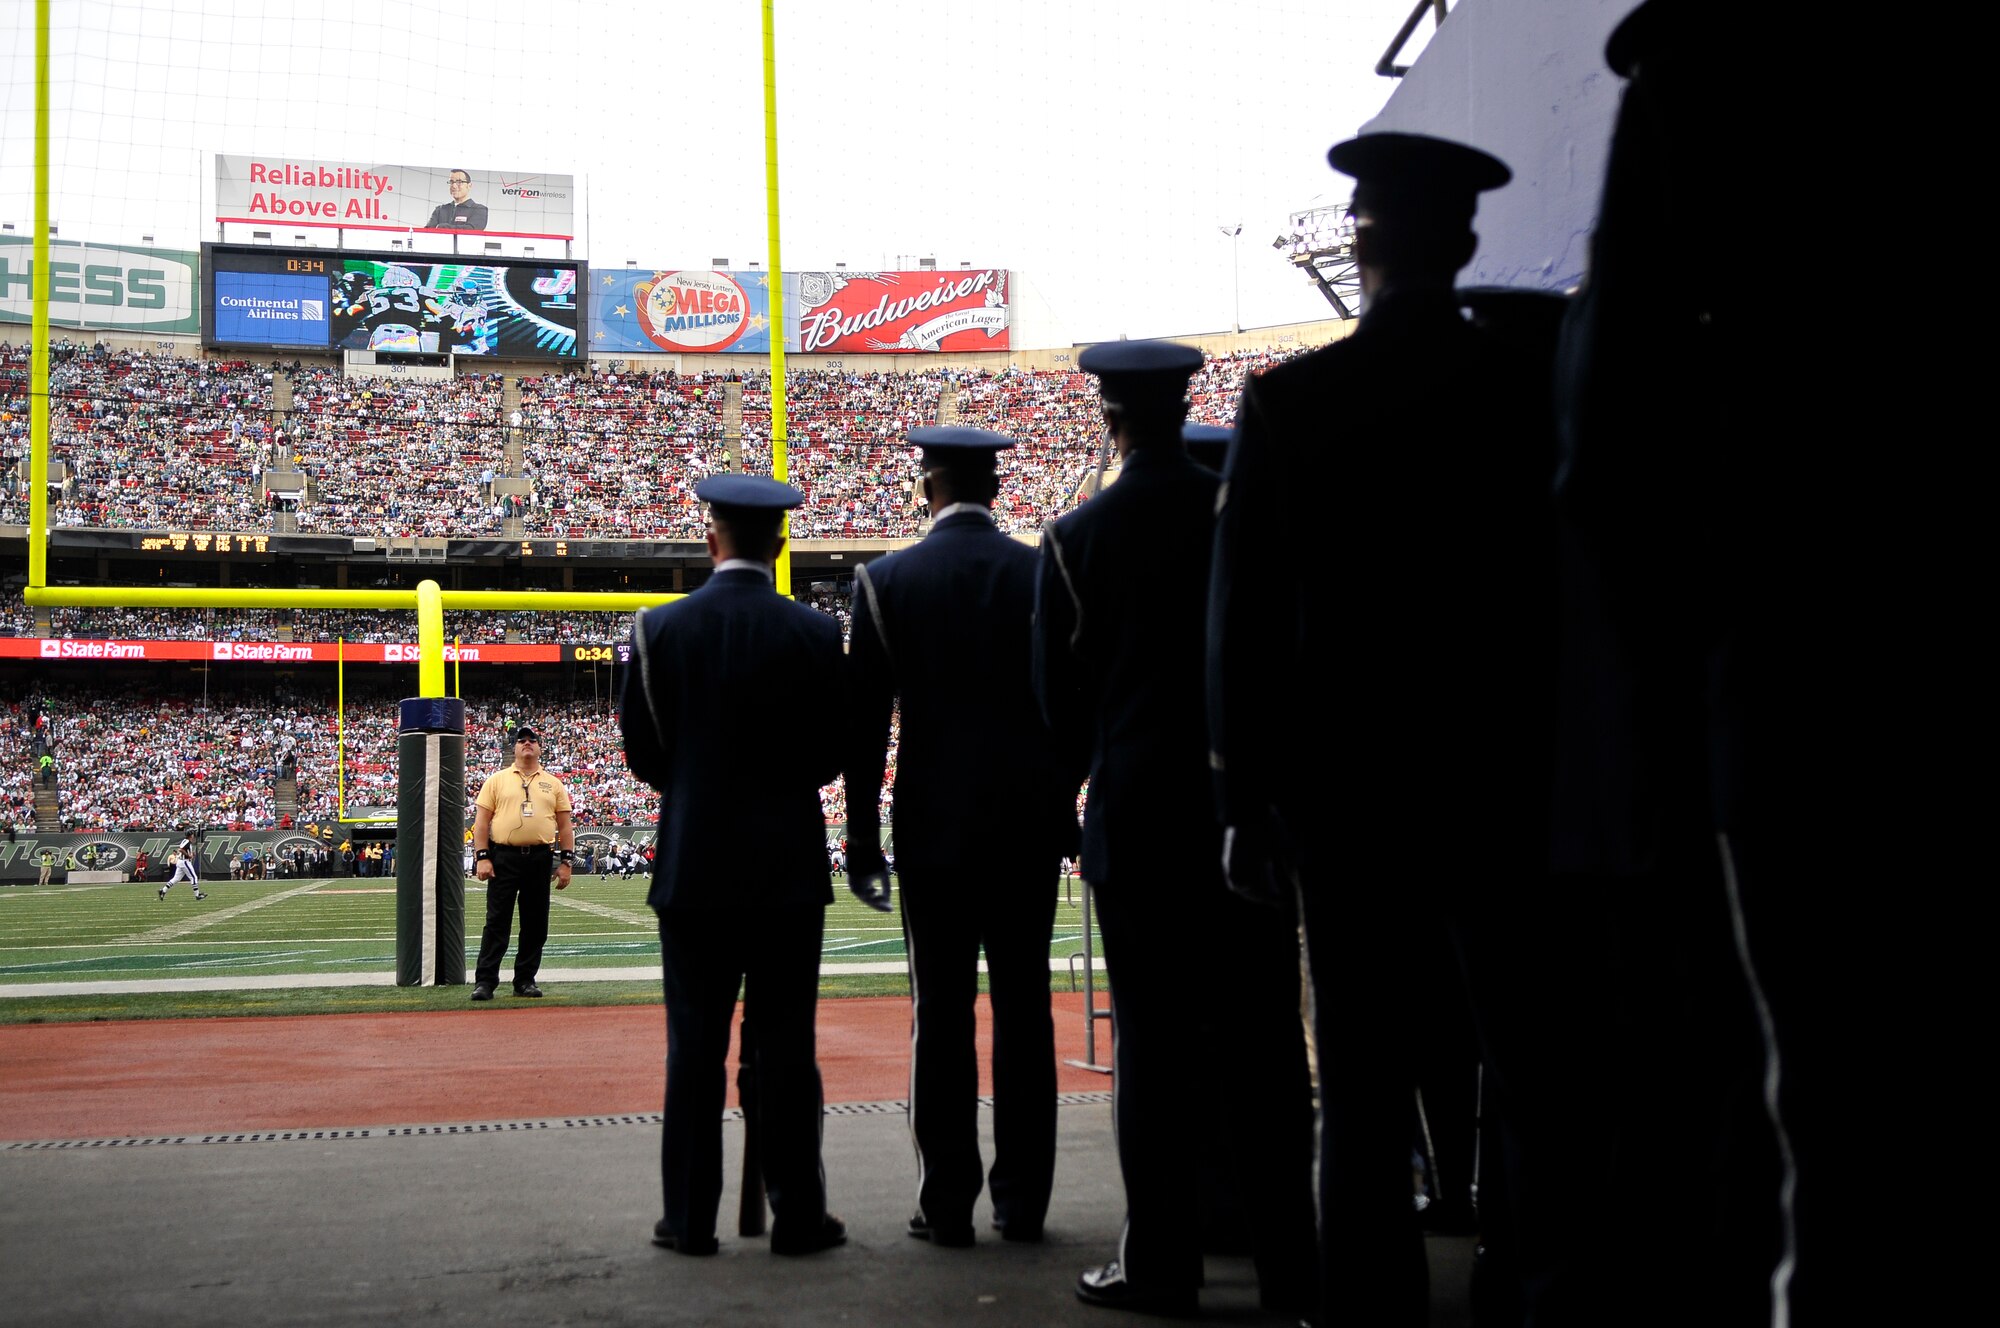 The United States Air Force Honor Guard Drill Team prepares to take the field to perform during the halftime show at a New York Jets football game against the Jacksonville Jaguars at Giants Stadium Nov. 15, in East Rutherford, New Jersey. The Drill Team tours worldwide representing all Airmen while showcasing Air Force precision and professionalism. During the Air Force Honor Guard's 60-year history, their traveling component, the Drill Team, has performed in every state of the union and many countries abroad. (U.S. Air Force photo/Senior Airman Marleah Miller)